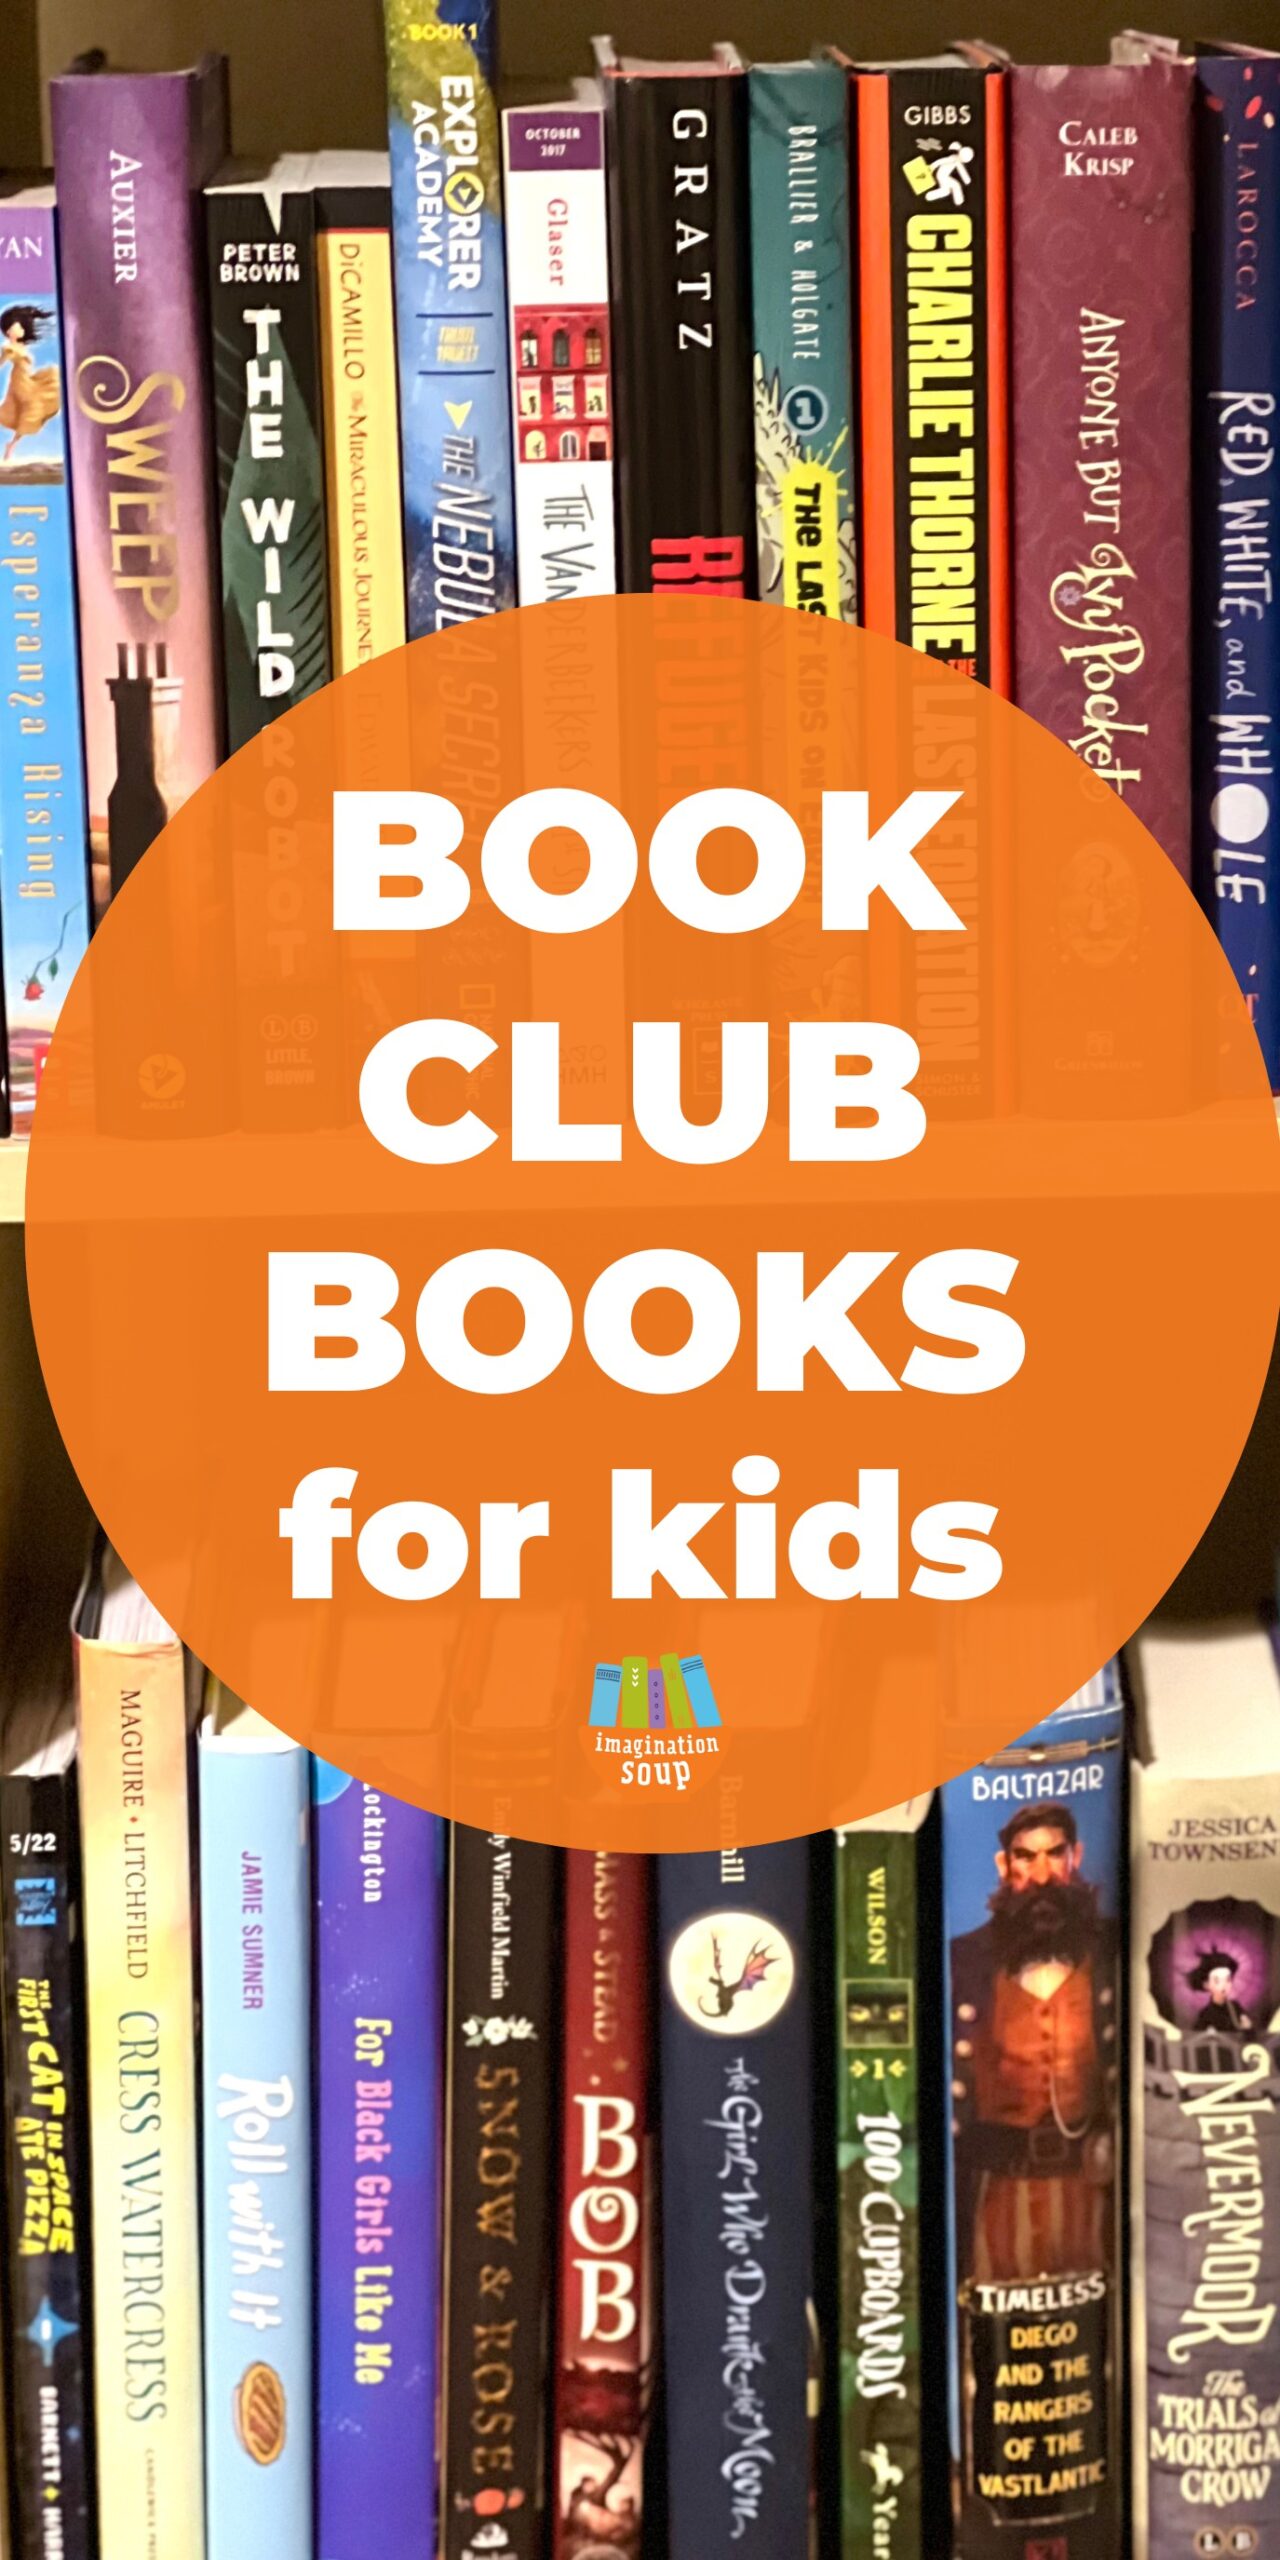 Find good book club books to read for your children's book clubs! The highly recommended books on these lists for elementary and middle school are perfect book club picks because they're thought-provoking and discussion worthy.